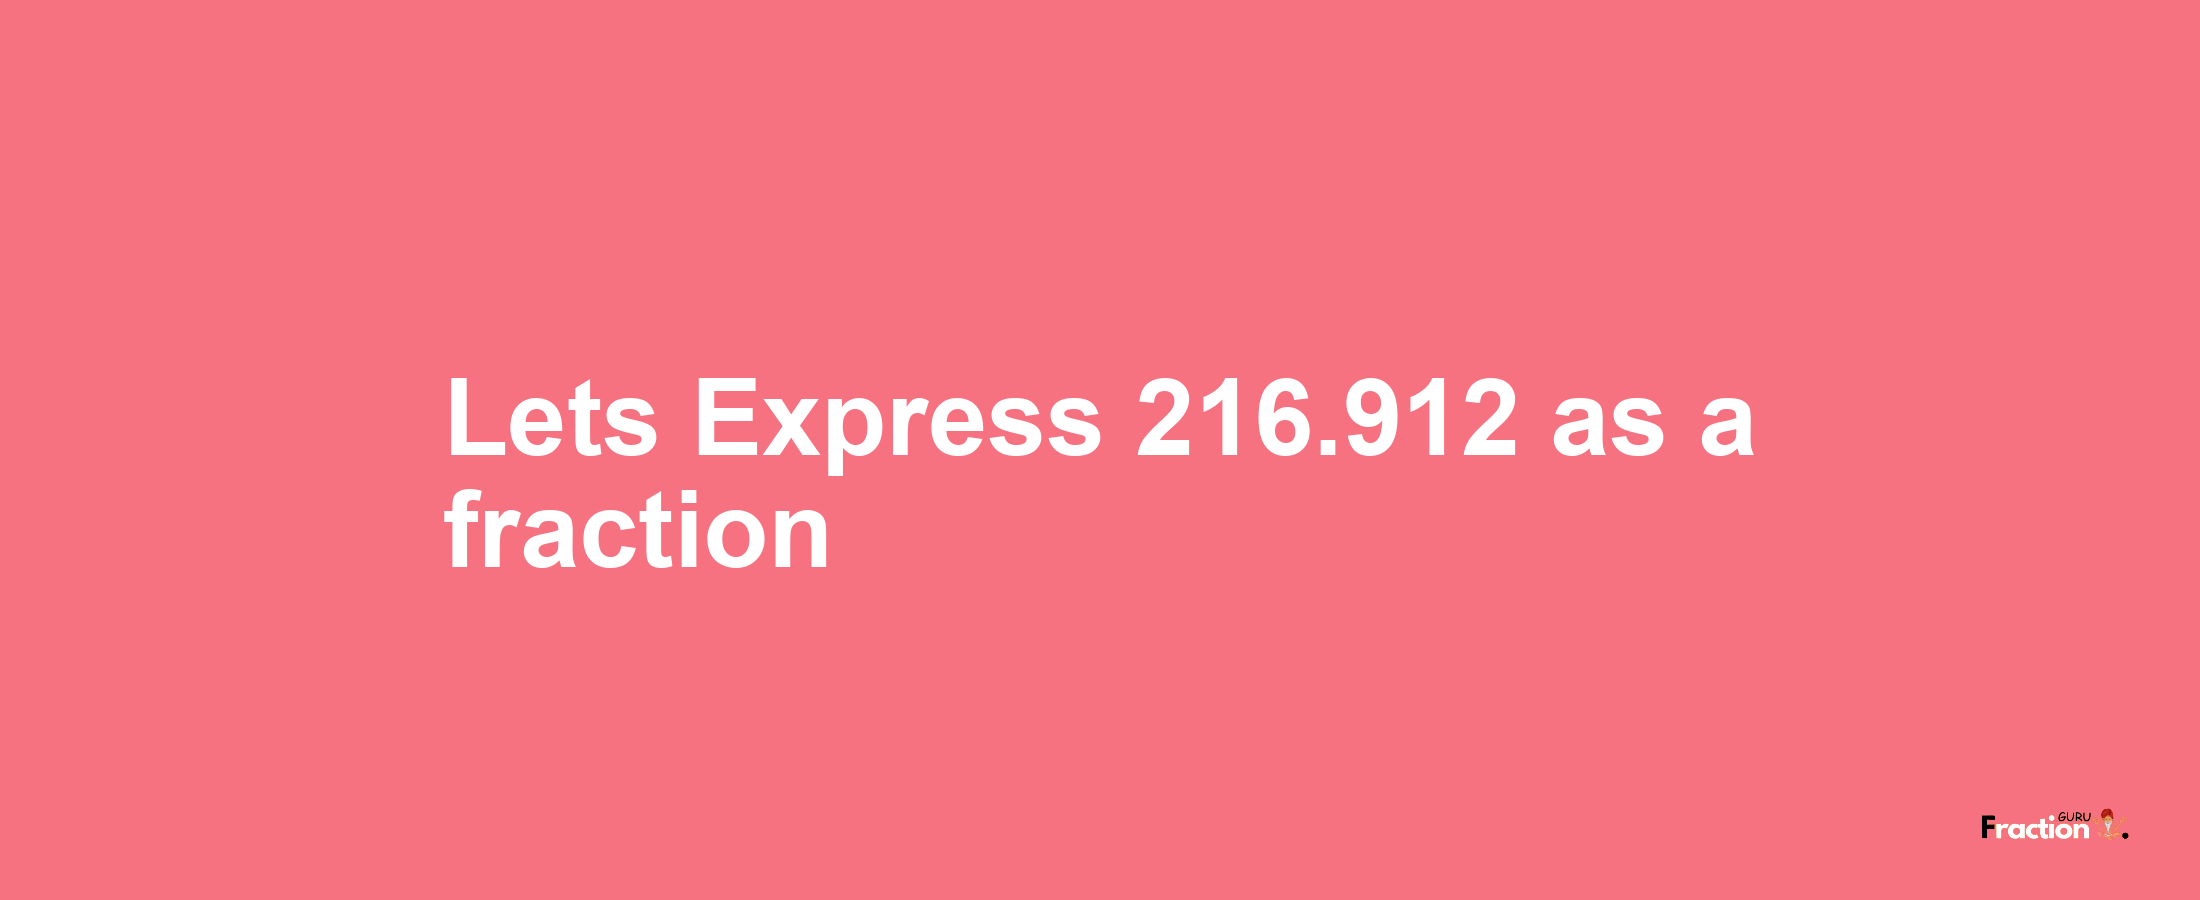 Lets Express 216.912 as afraction